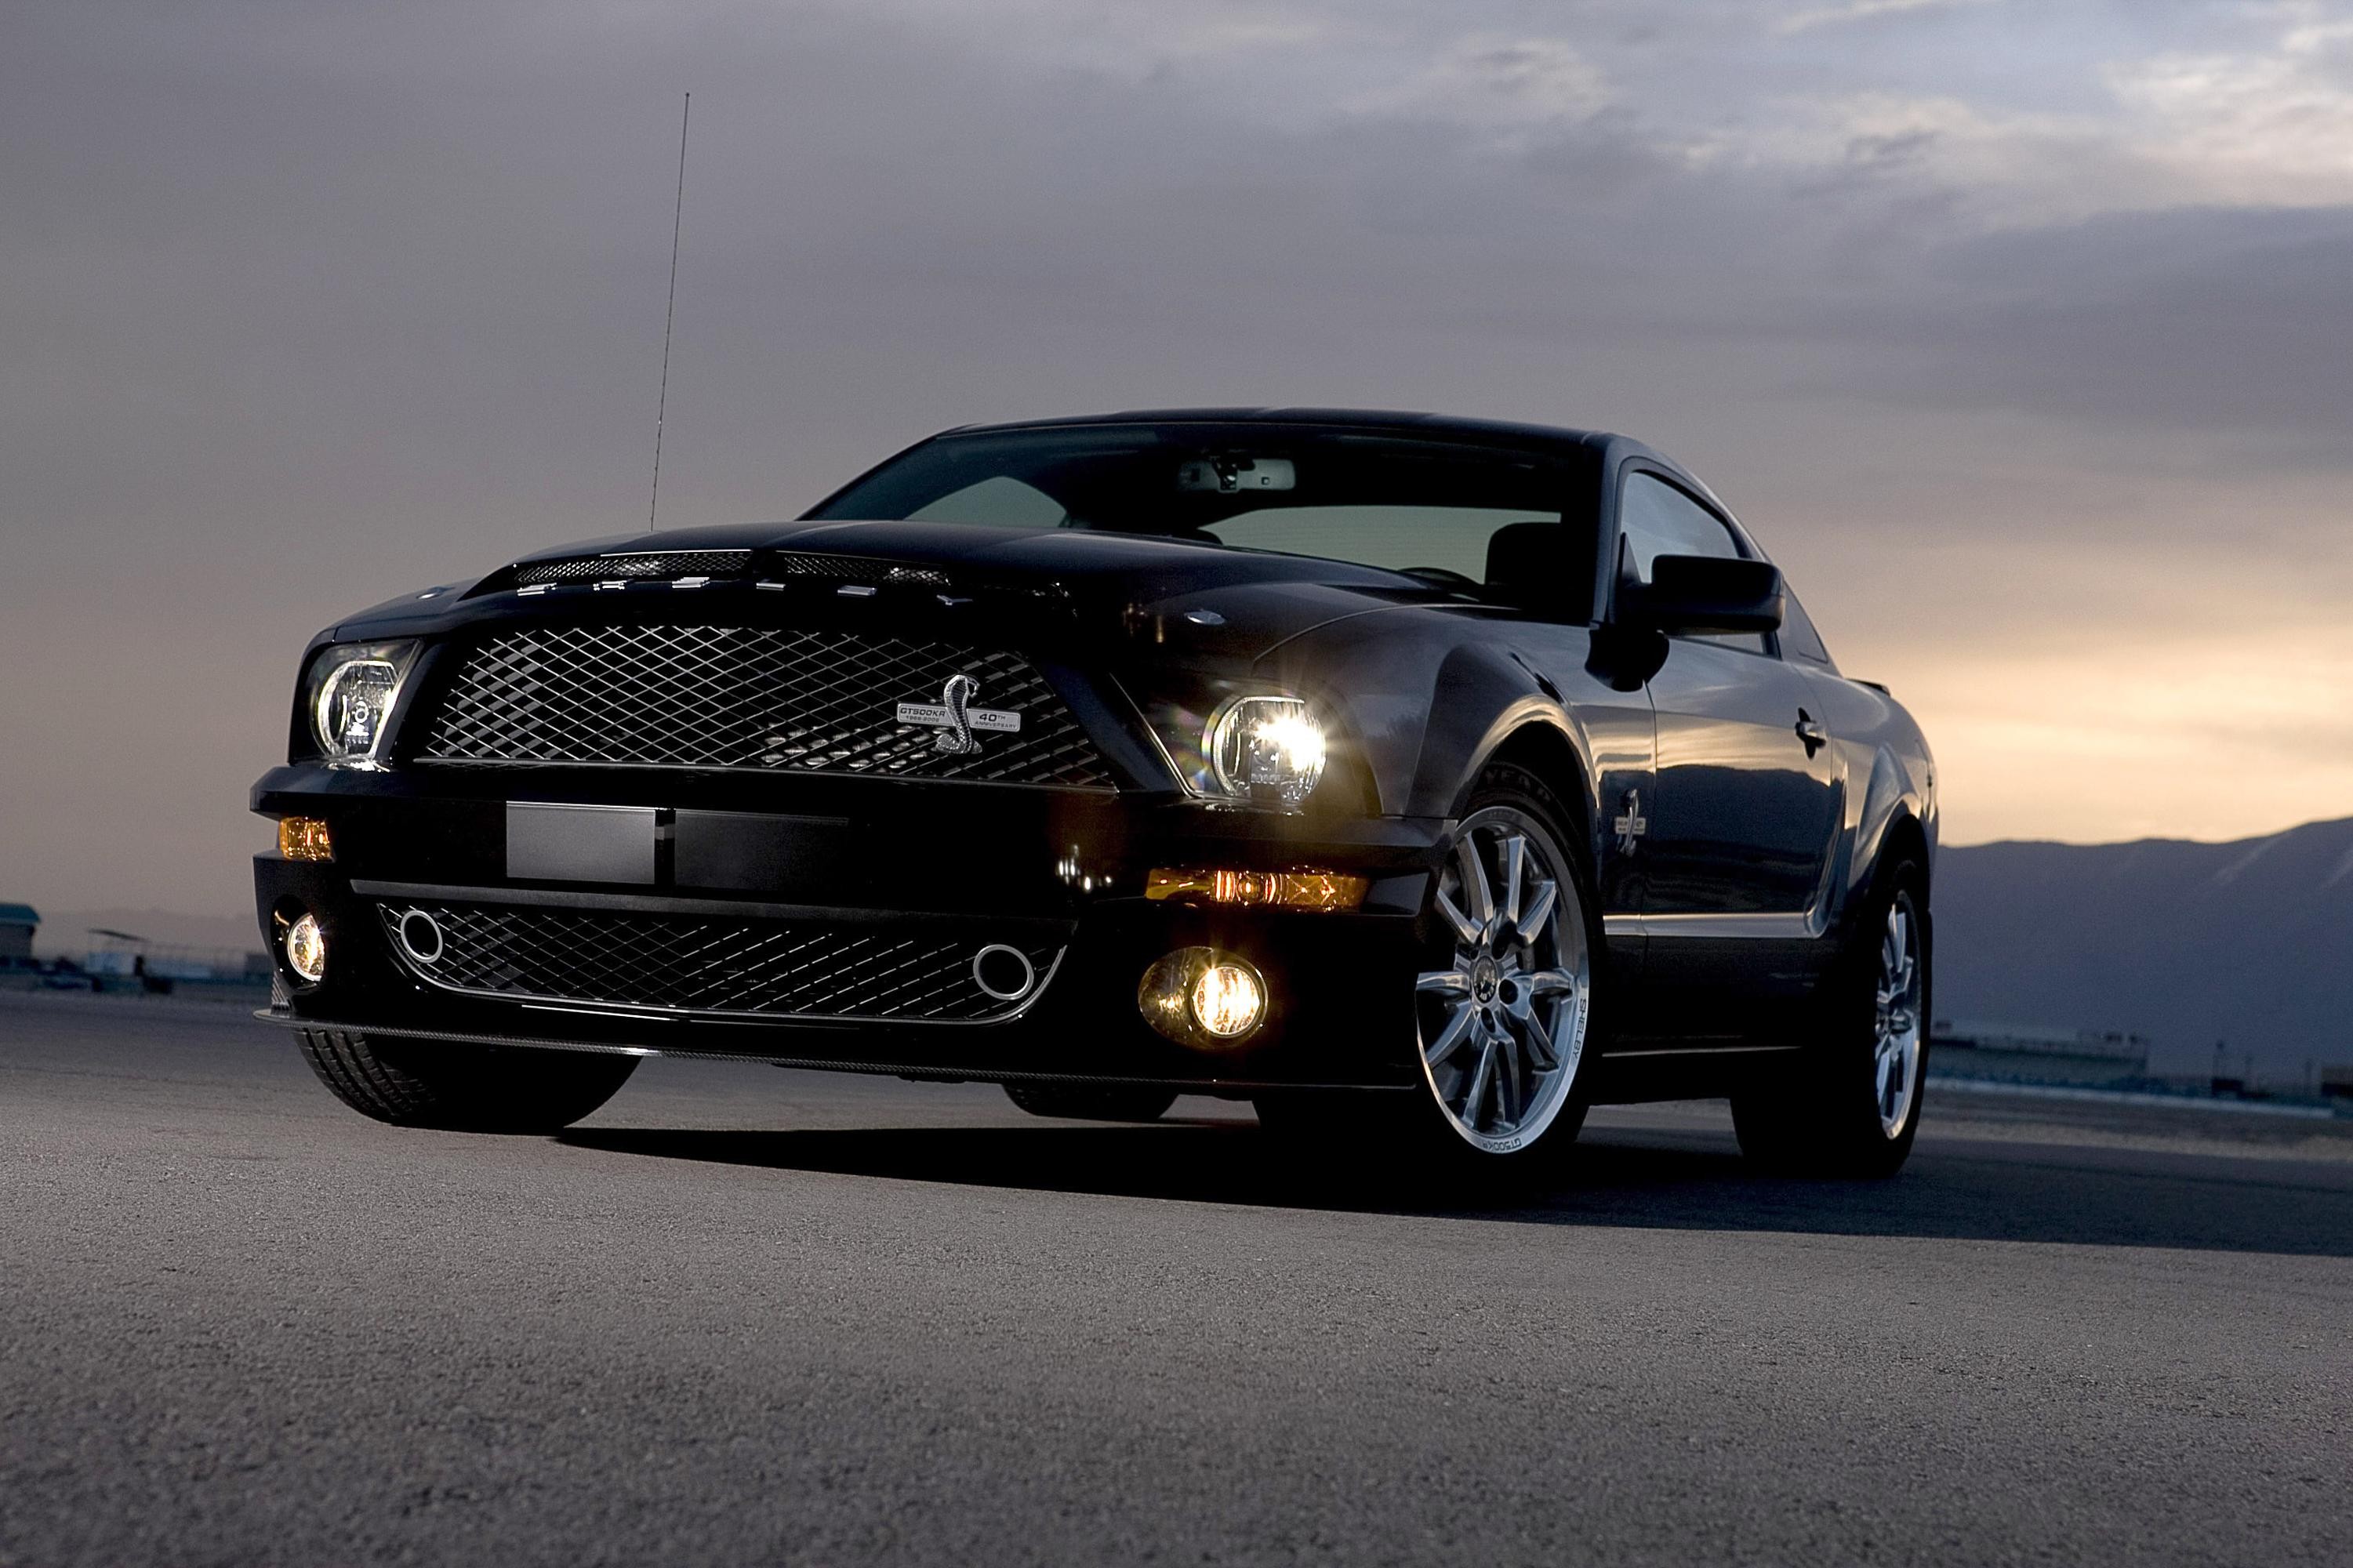 General 3001x2000 car Ford Mustang Ford Mustang Shelby Ford vehicle black cars Ford Mustang S-197 muscle cars American cars